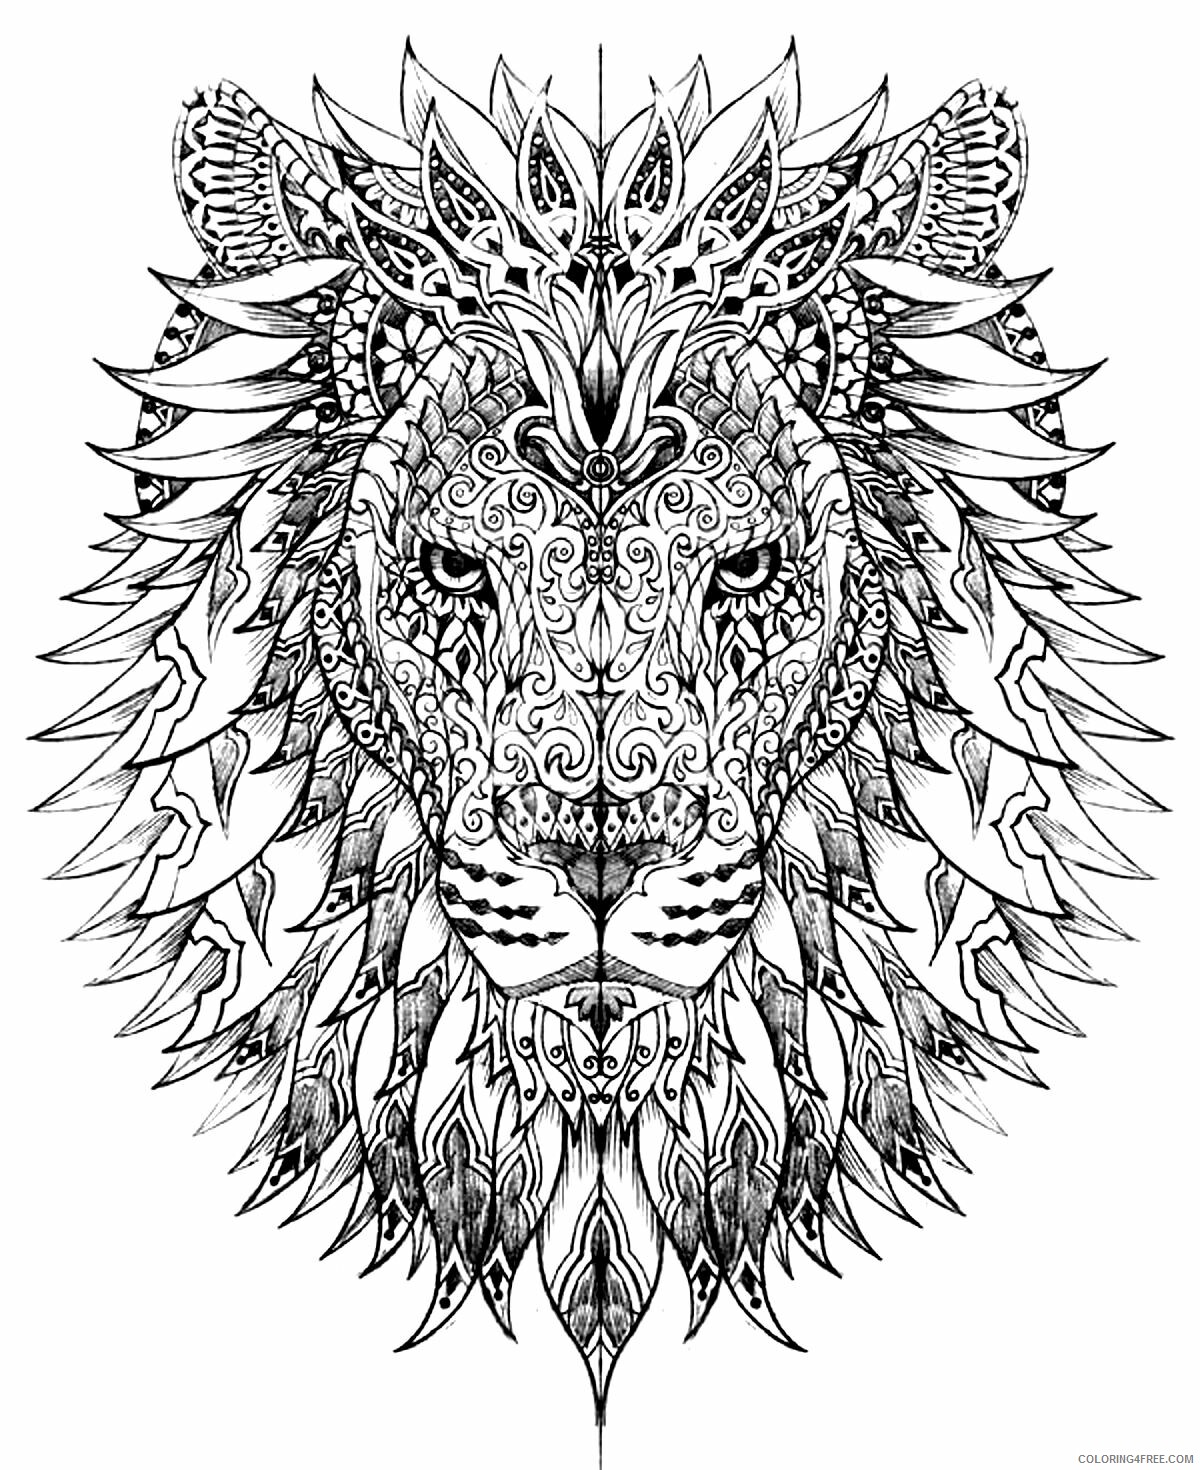 Advanced Coloring Pages of Animals Printable Sheets Colouring images pictures 2021 a Coloring4free